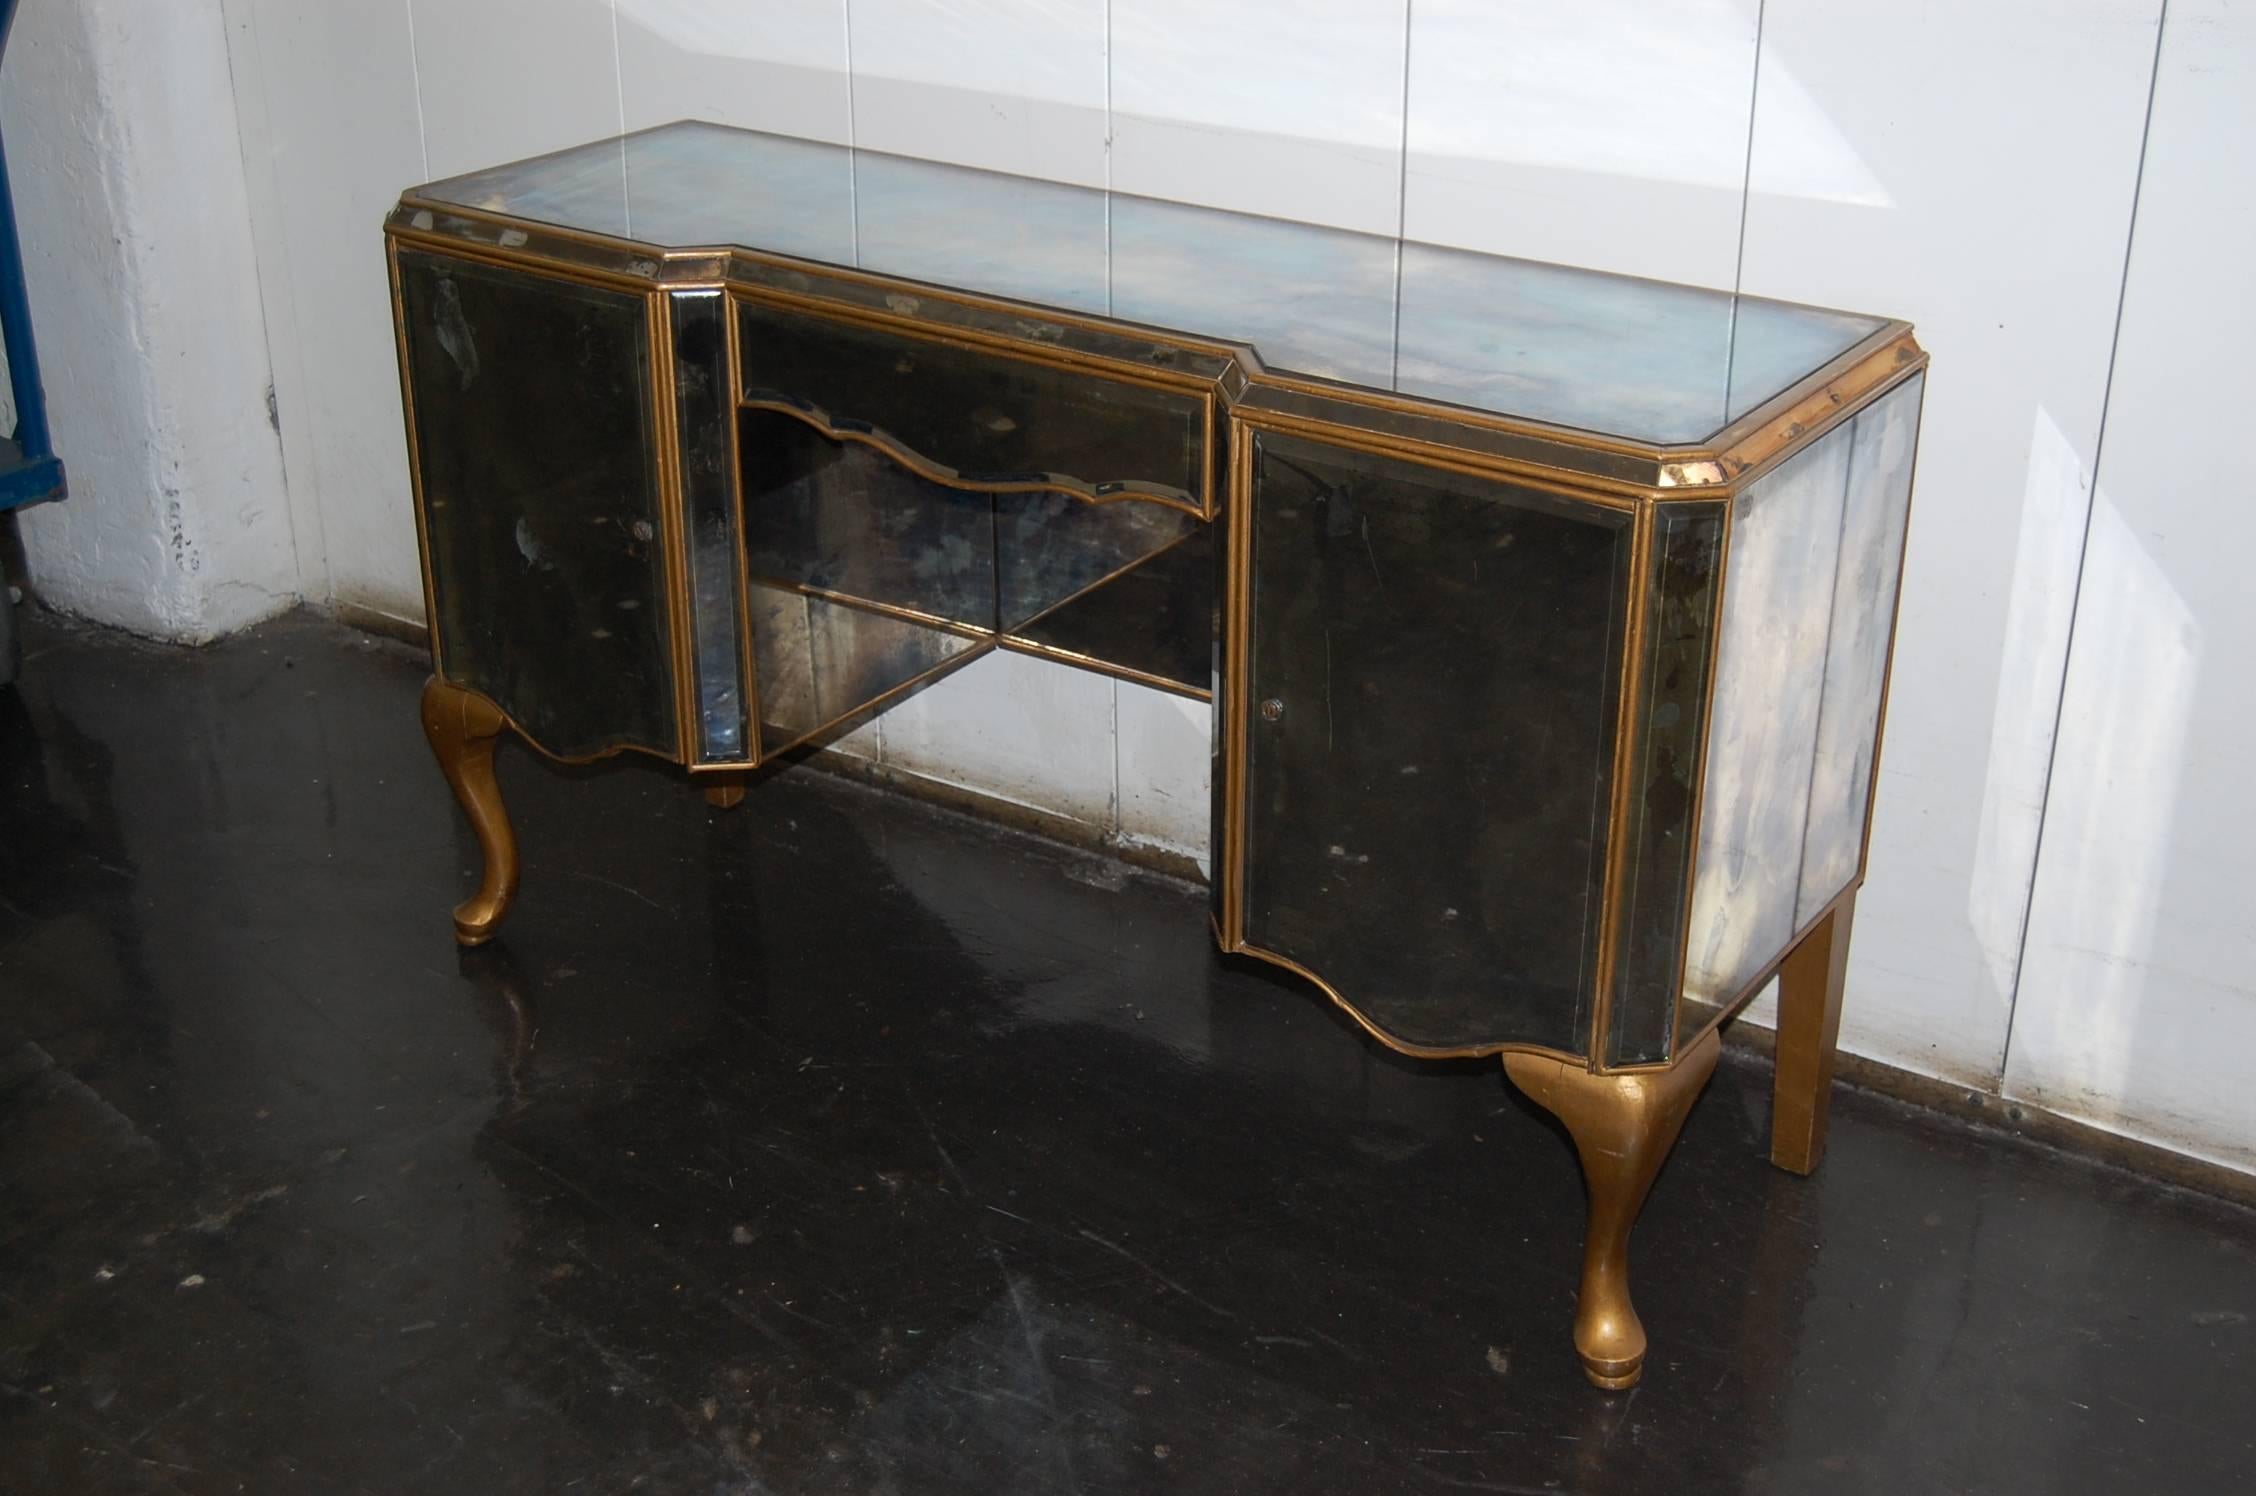 Very well built Mid-Century dressing table with marbled mirror, in good condition. Two doors and one drawer, no keys. No breaks or missing glass.